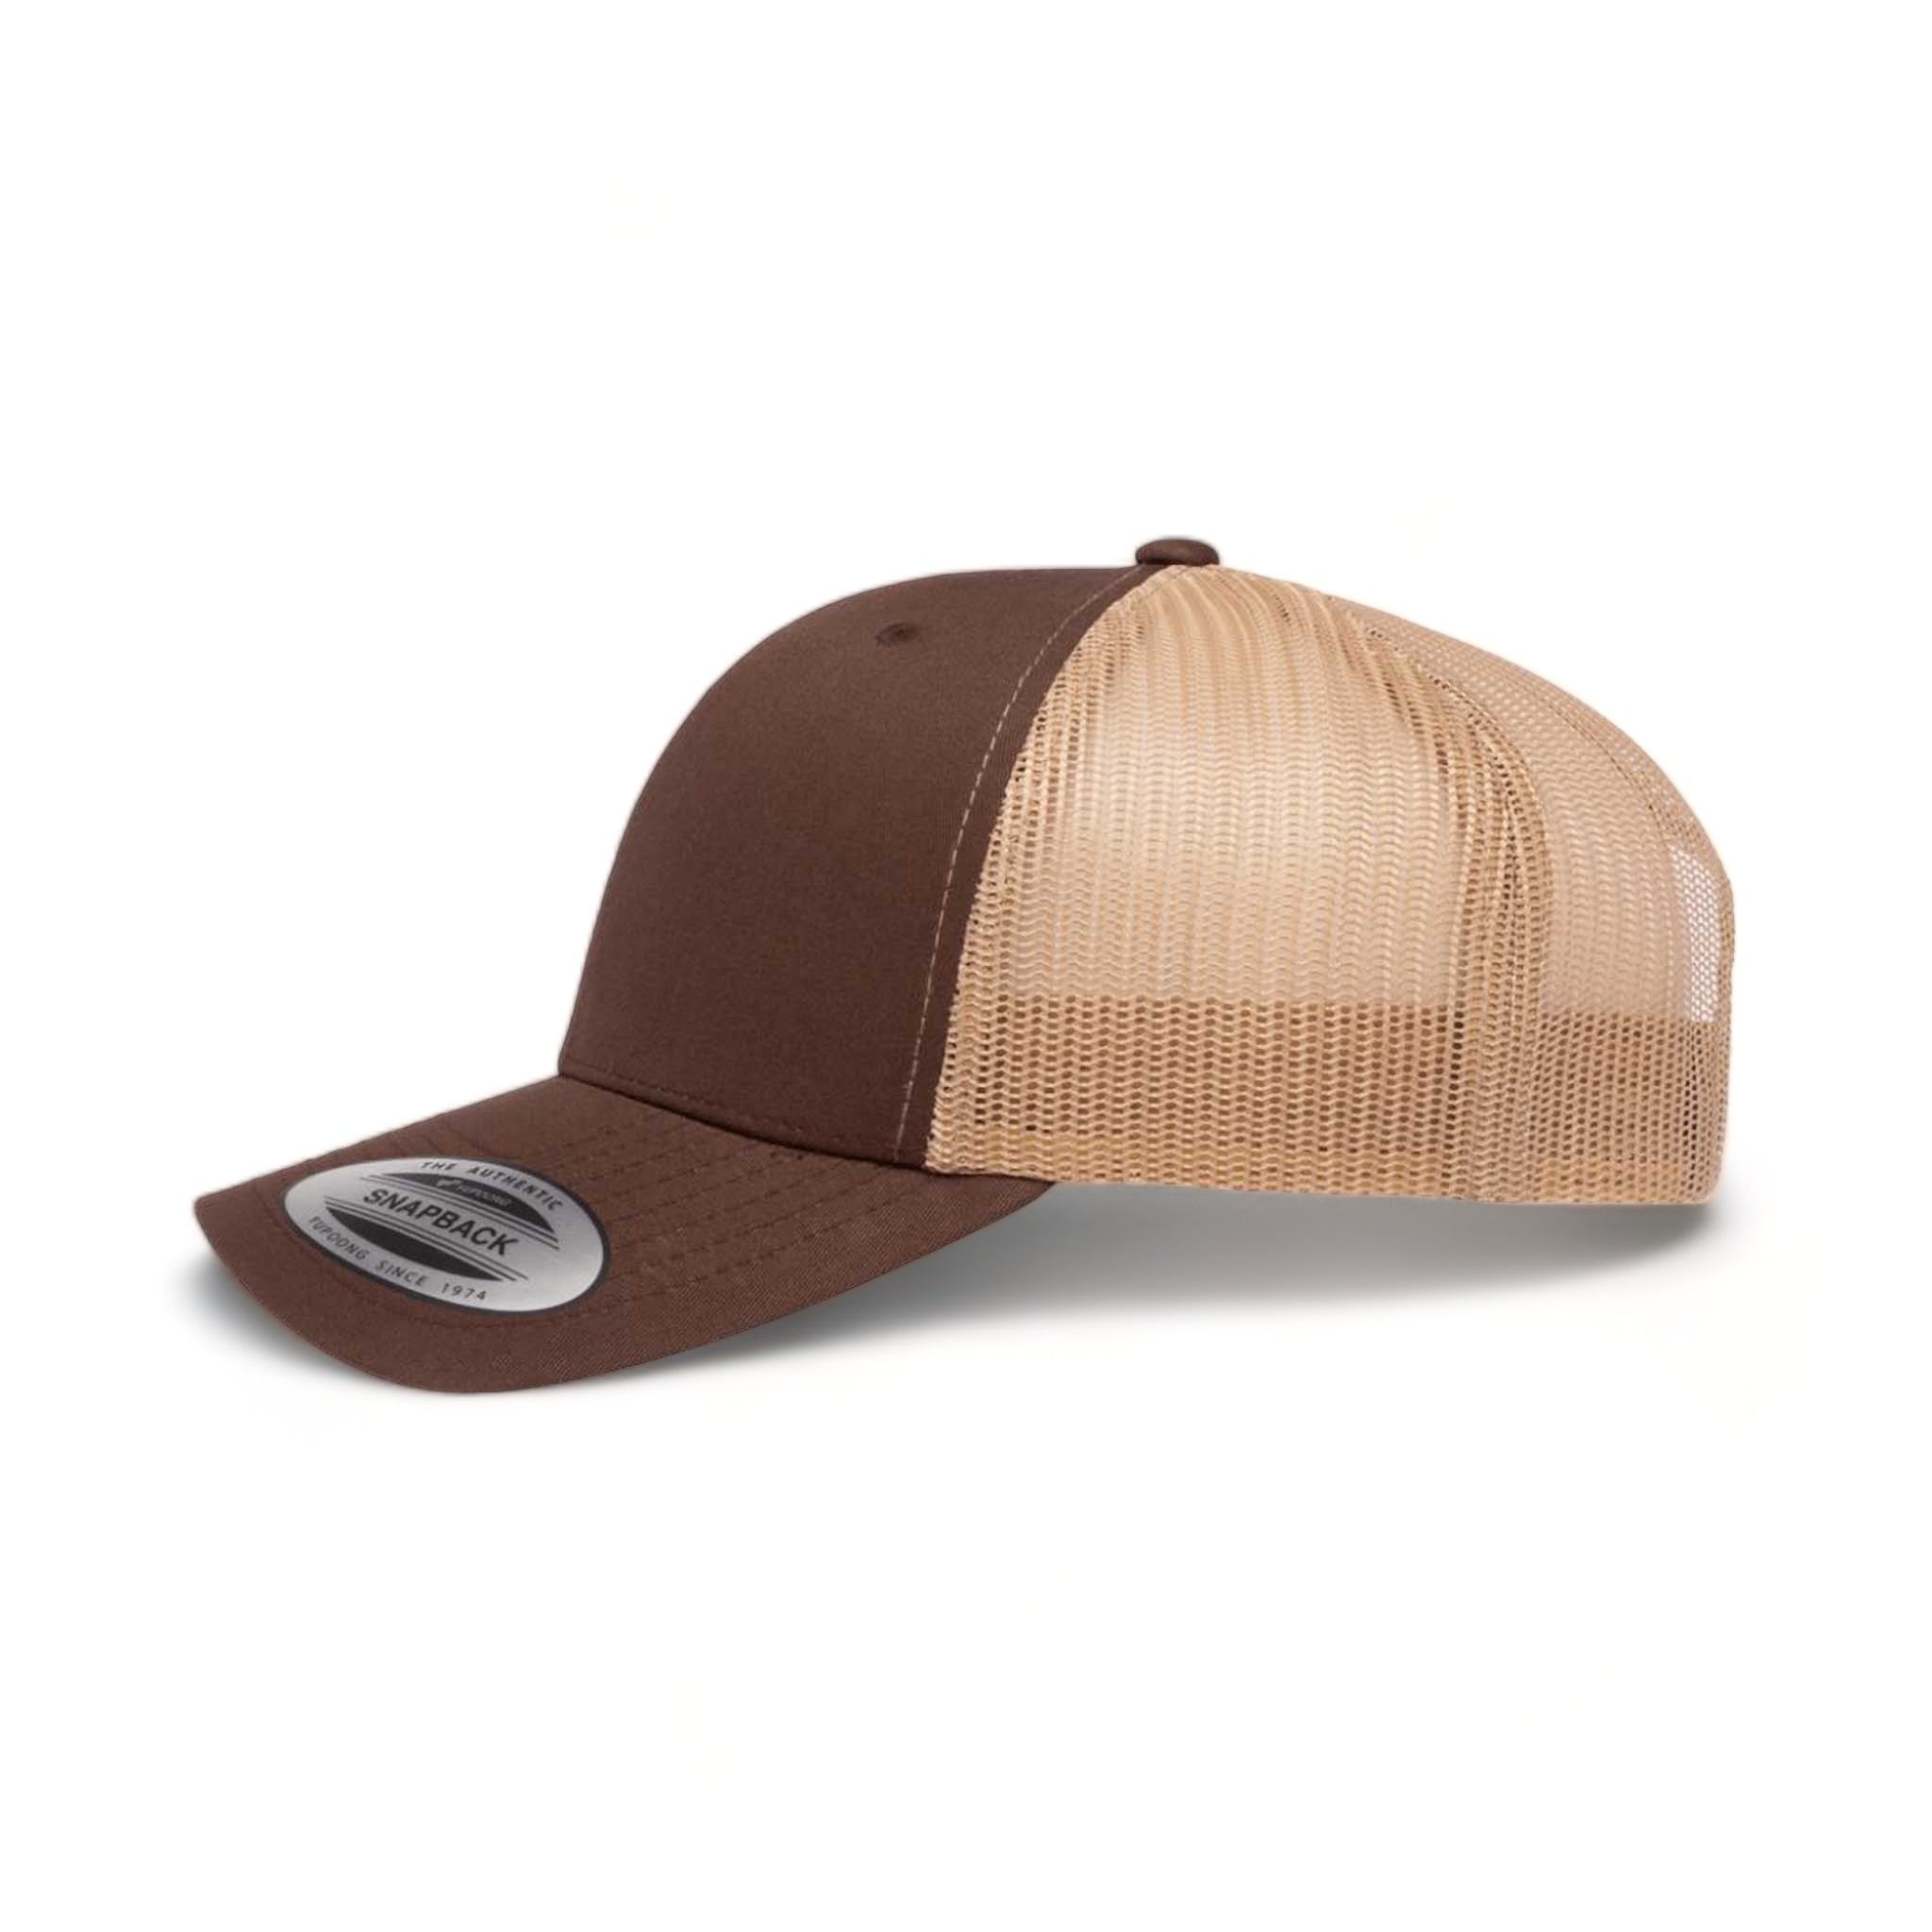 Side view of YP Classics 6606 custom hat in brown and khaki